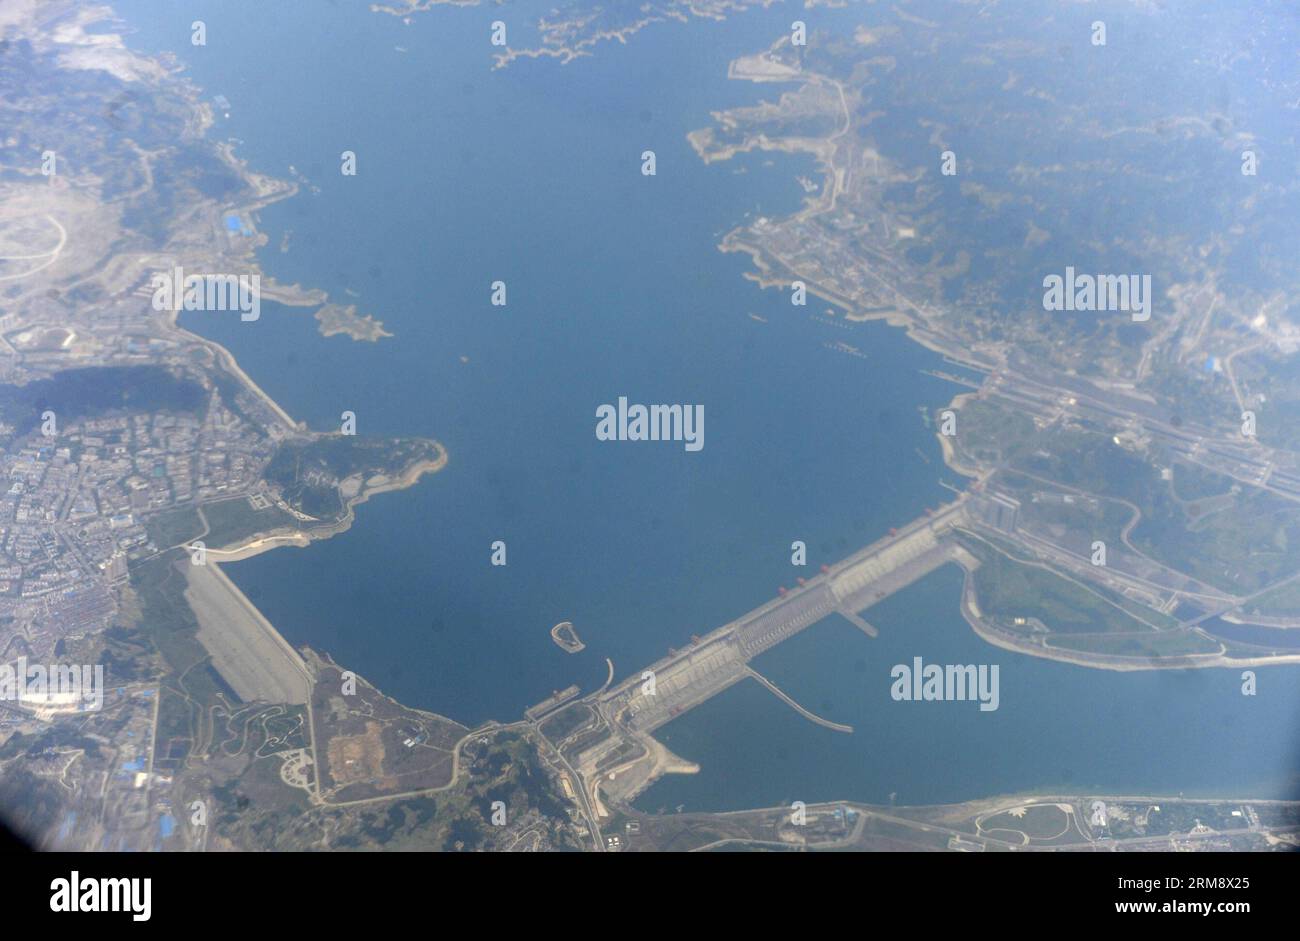 (140428) -- WUHAN, April 28, 2014 (Xinhua) -- This aerial photo taken on April 28, 2014 from an Airbus A319 passenger plane during a test run of Shennongjia s Hongping Airport shows the Three Gorges Dam on the Yangtze River in central China s Hubei Province. A test run was held Monday at Shennongjia s newly-built Hongping Airport, which is to officially open on May 8. The airport, situated at 2,580 meters above sea level, is the highest of its kind in central China. (Xinhua/Hao Tongqian) (lmm) CHINA-HUBEI-SHENNONGJIA-NEW AIRPORT-TEST RUN (CN) PUBLICATIONxNOTxINxCHN   Wuhan April 28 2014 XINHUA Stock Photo